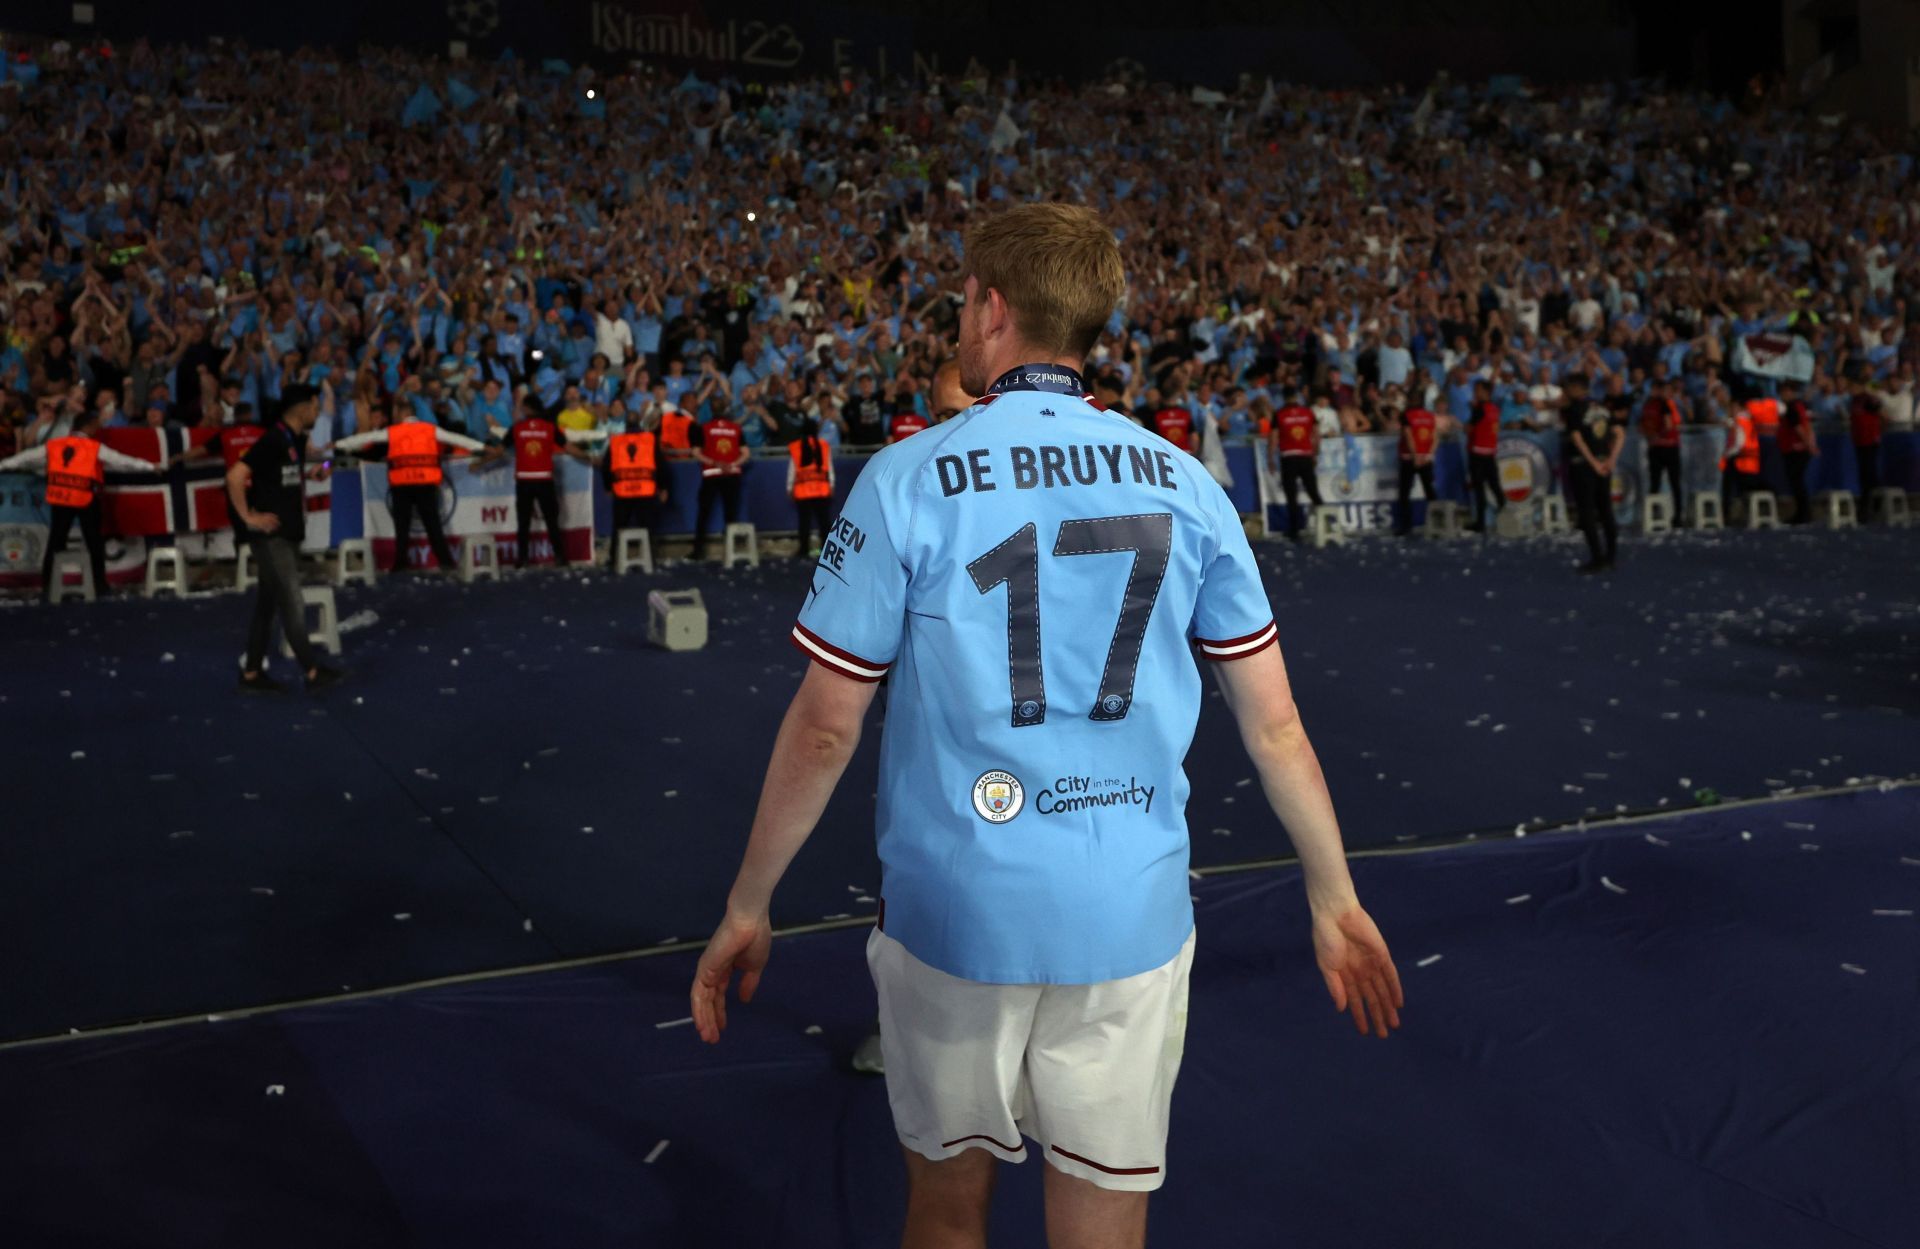 Kevin De Bruyne after winning the UEFA Champions League